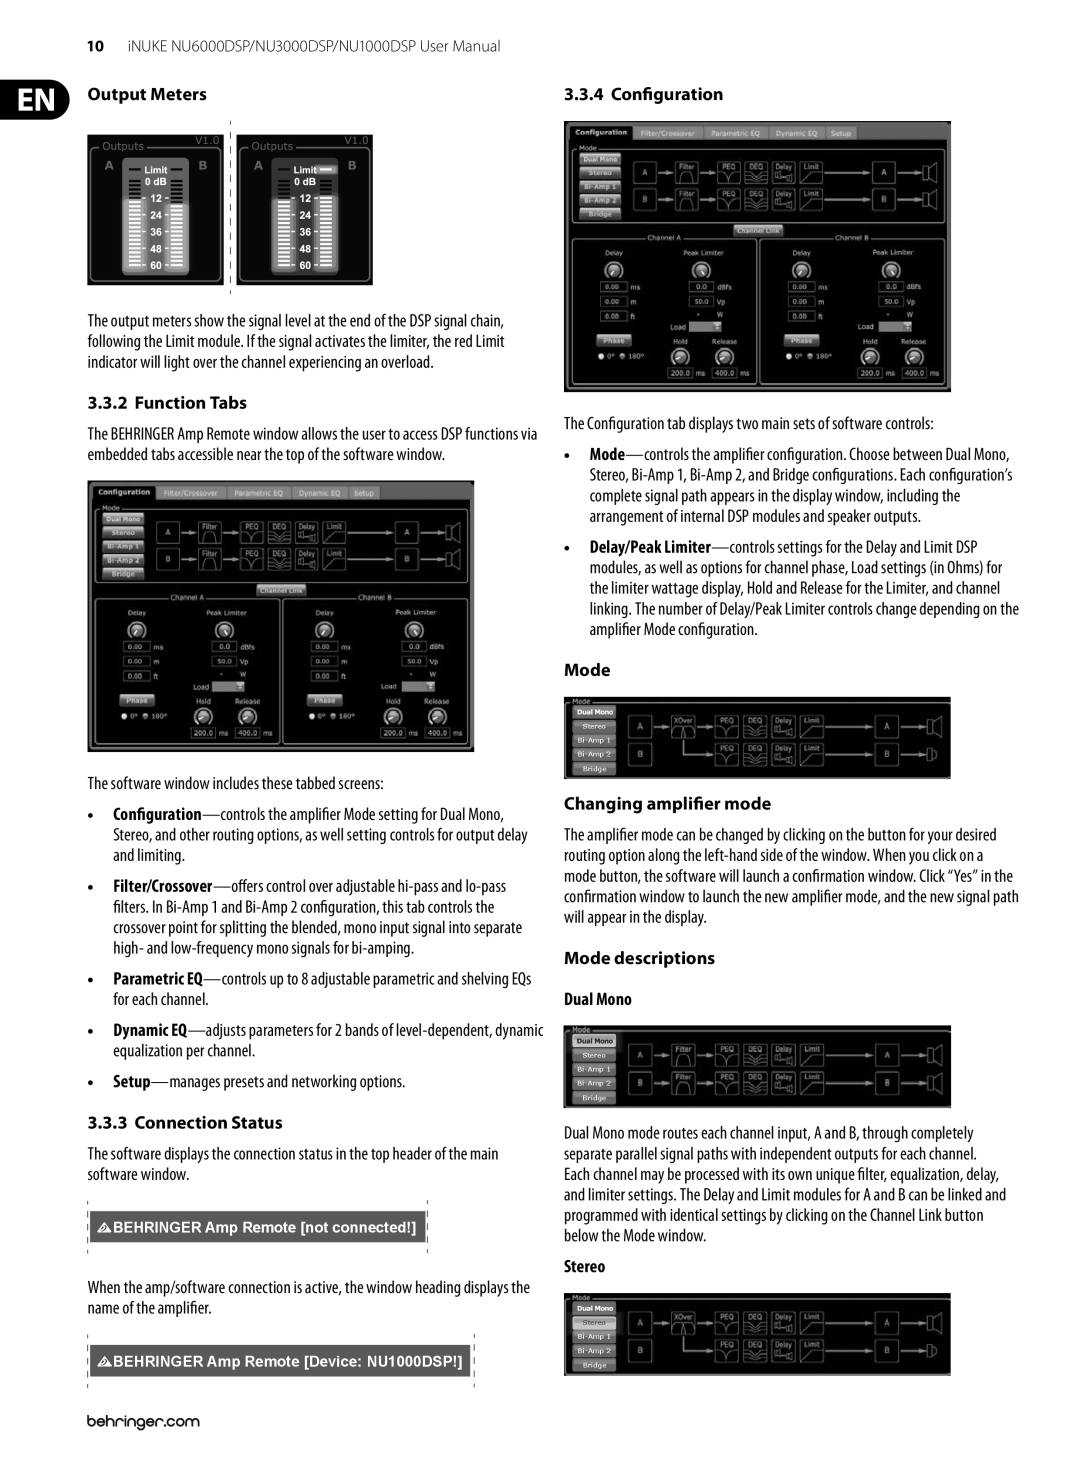 Behringer NU3000DSP Output Meters, Function Tabs, Connection Status, Configuration, Mode, Changing amplifier mode, Stereo 